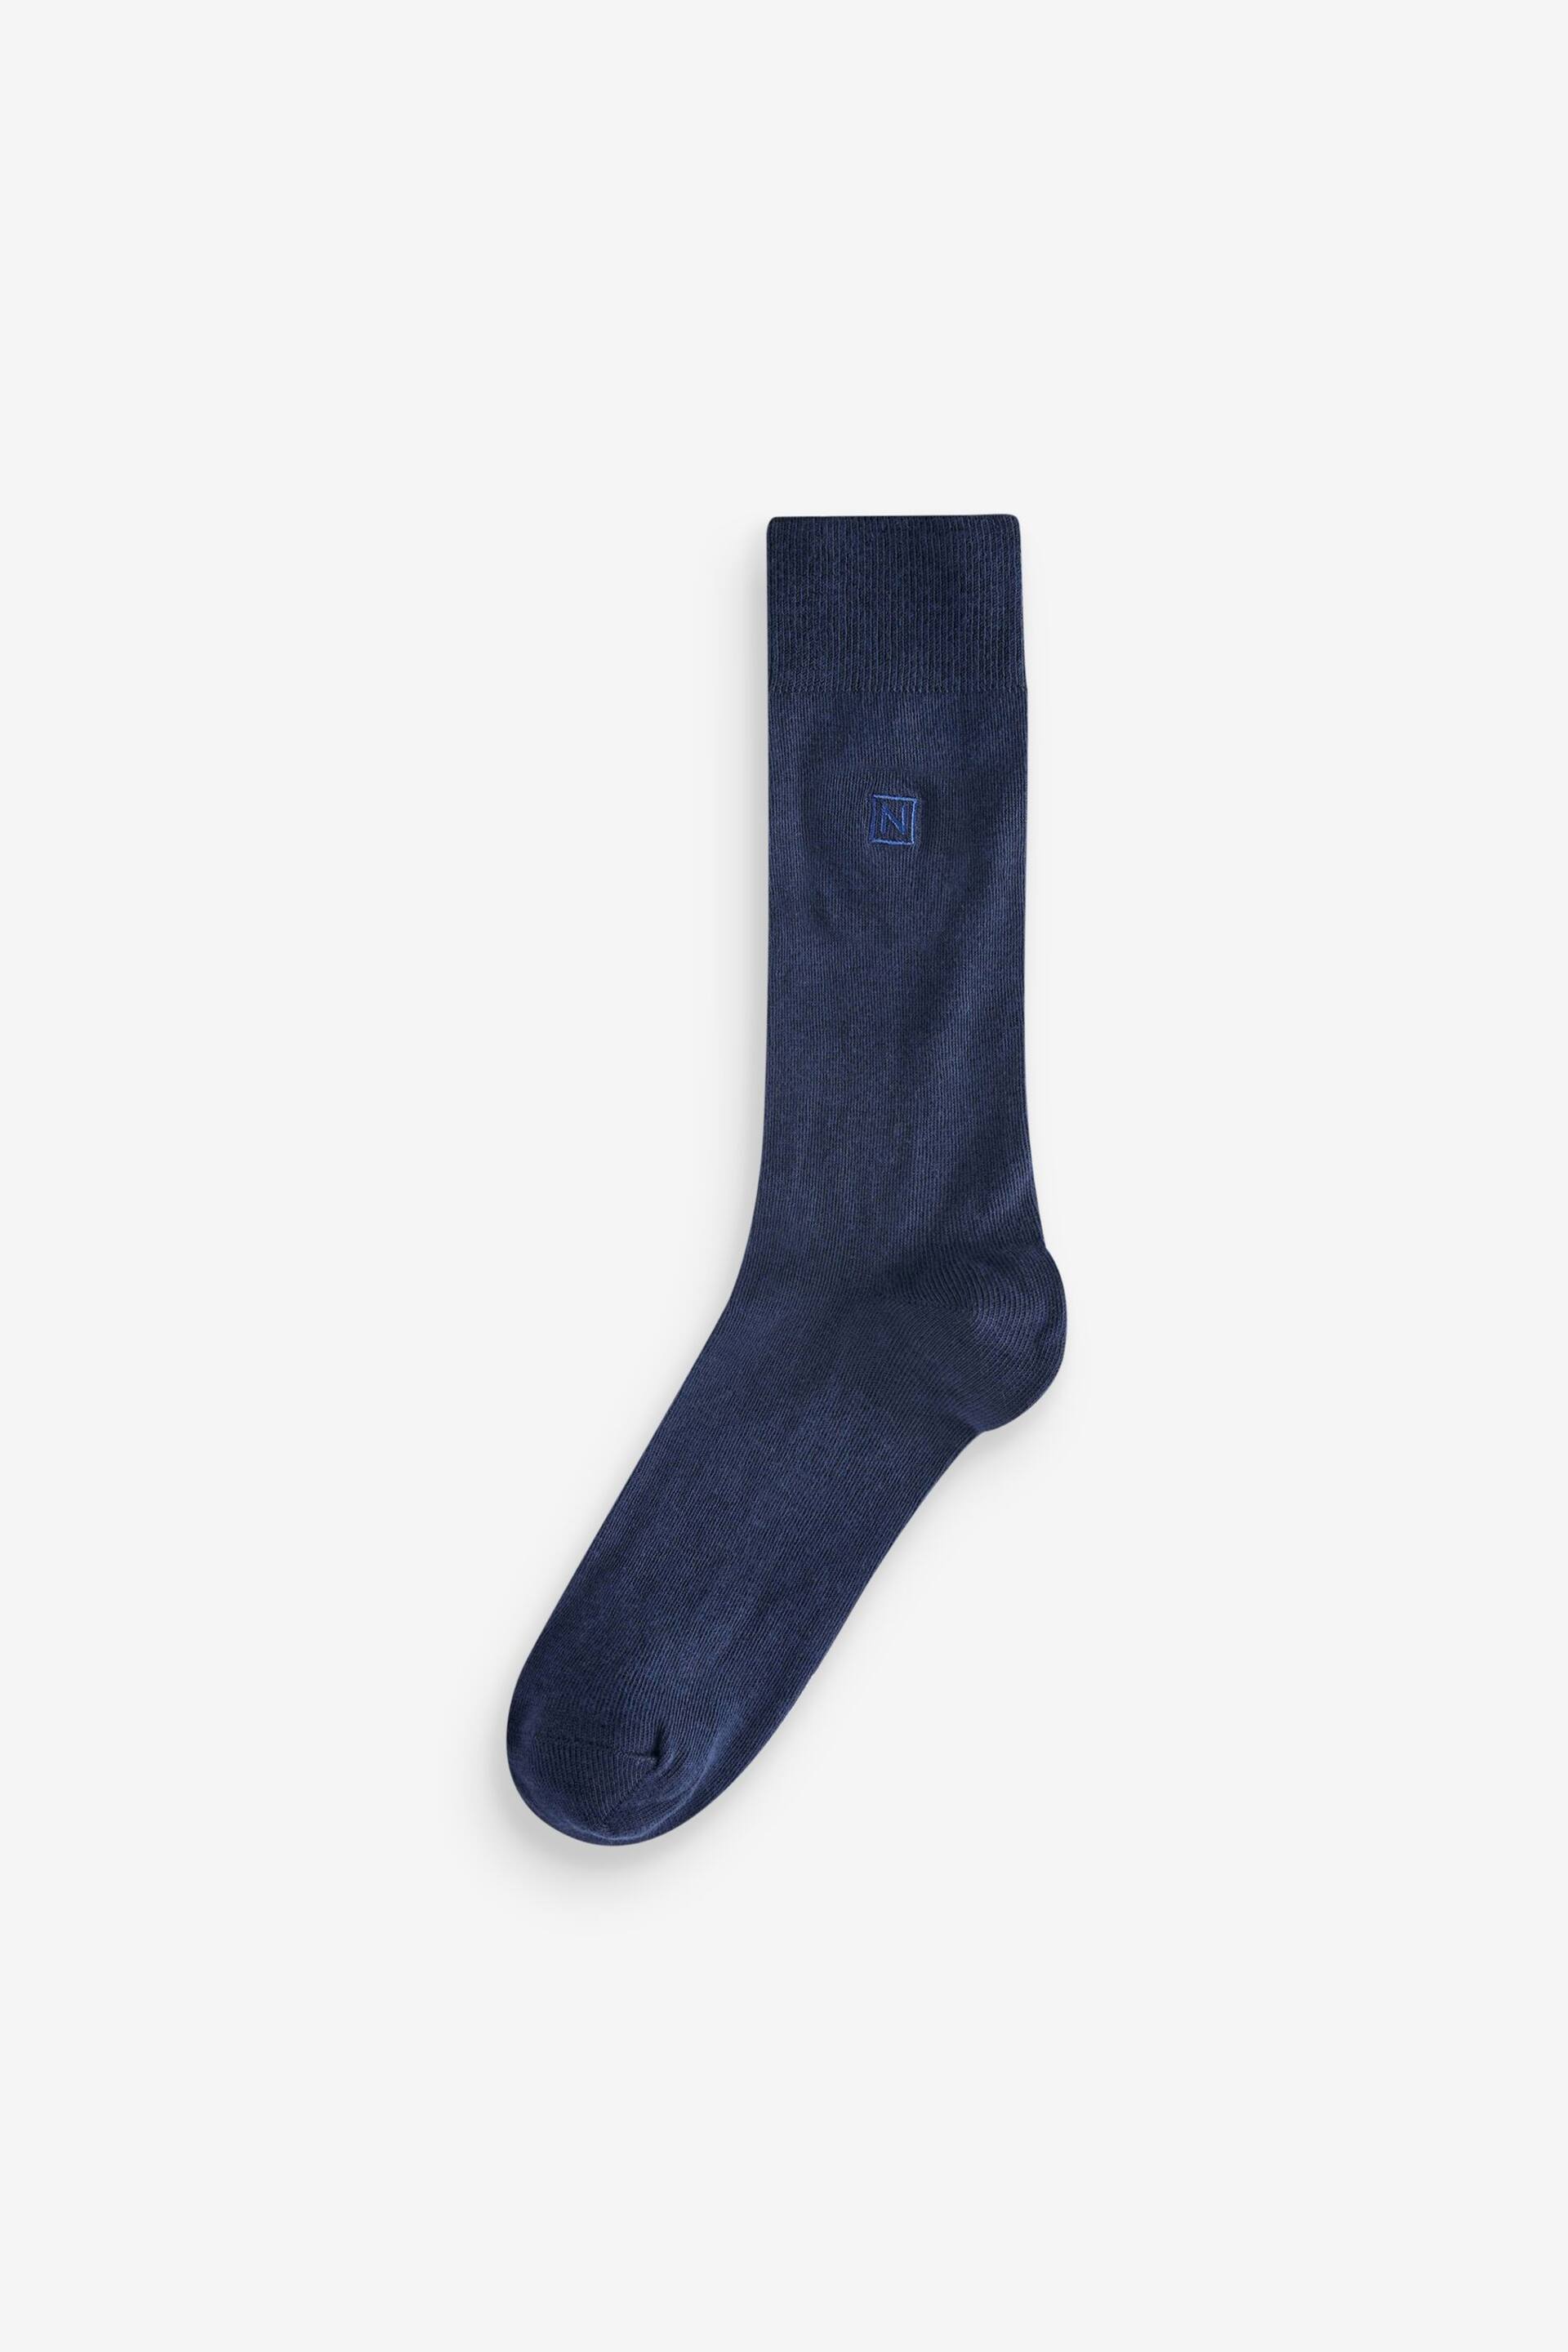 Blue/Neutrals 8 Pack Embroidered Lasting Fresh Socks - Image 8 of 10